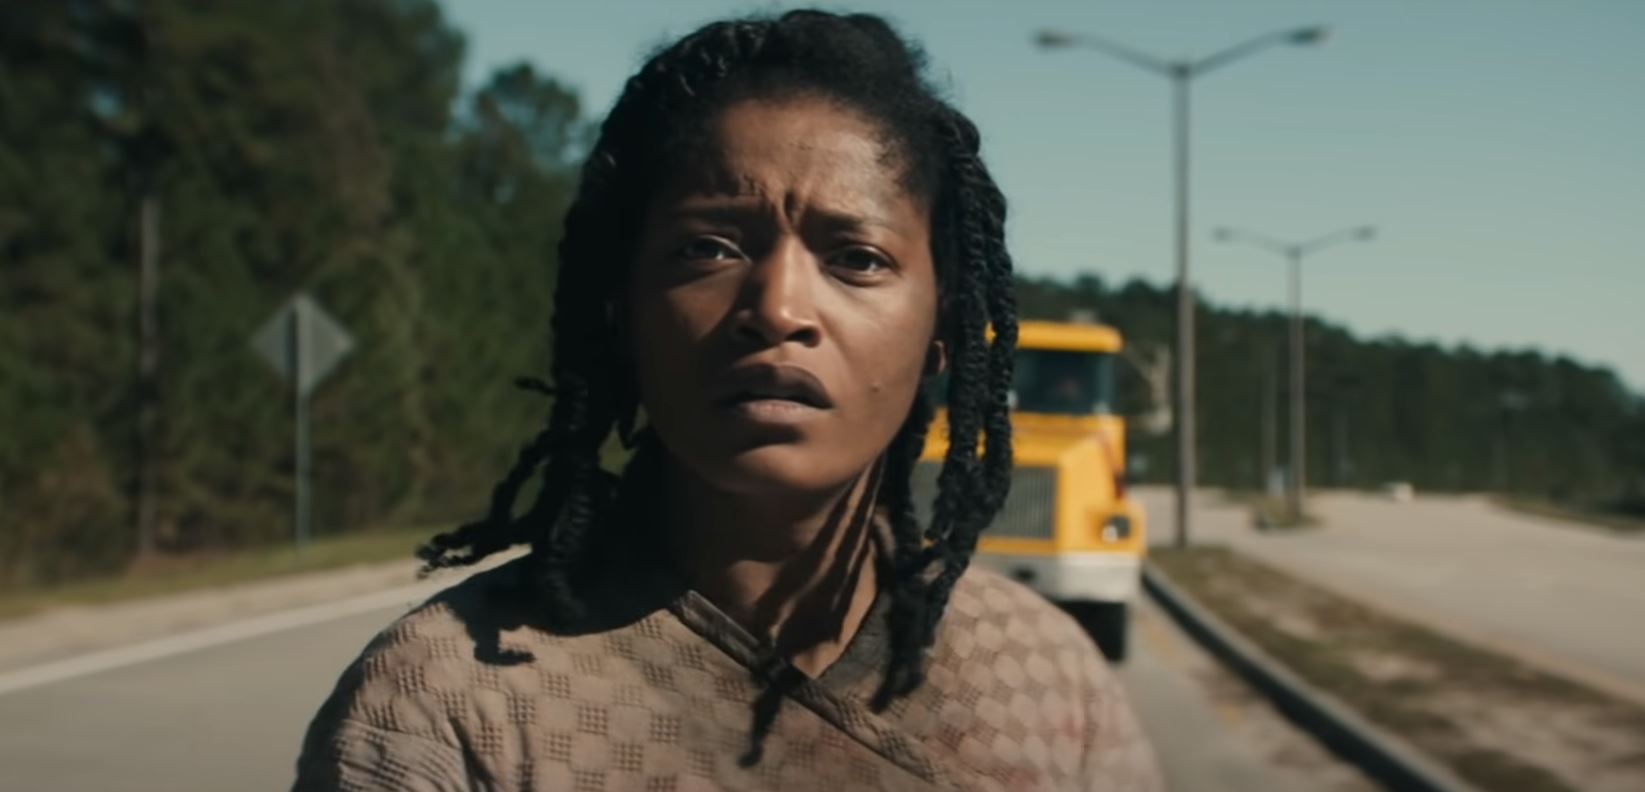 Is Alice a True Story? Is Keke Palmer's 2022 Movie Based on Real Life?